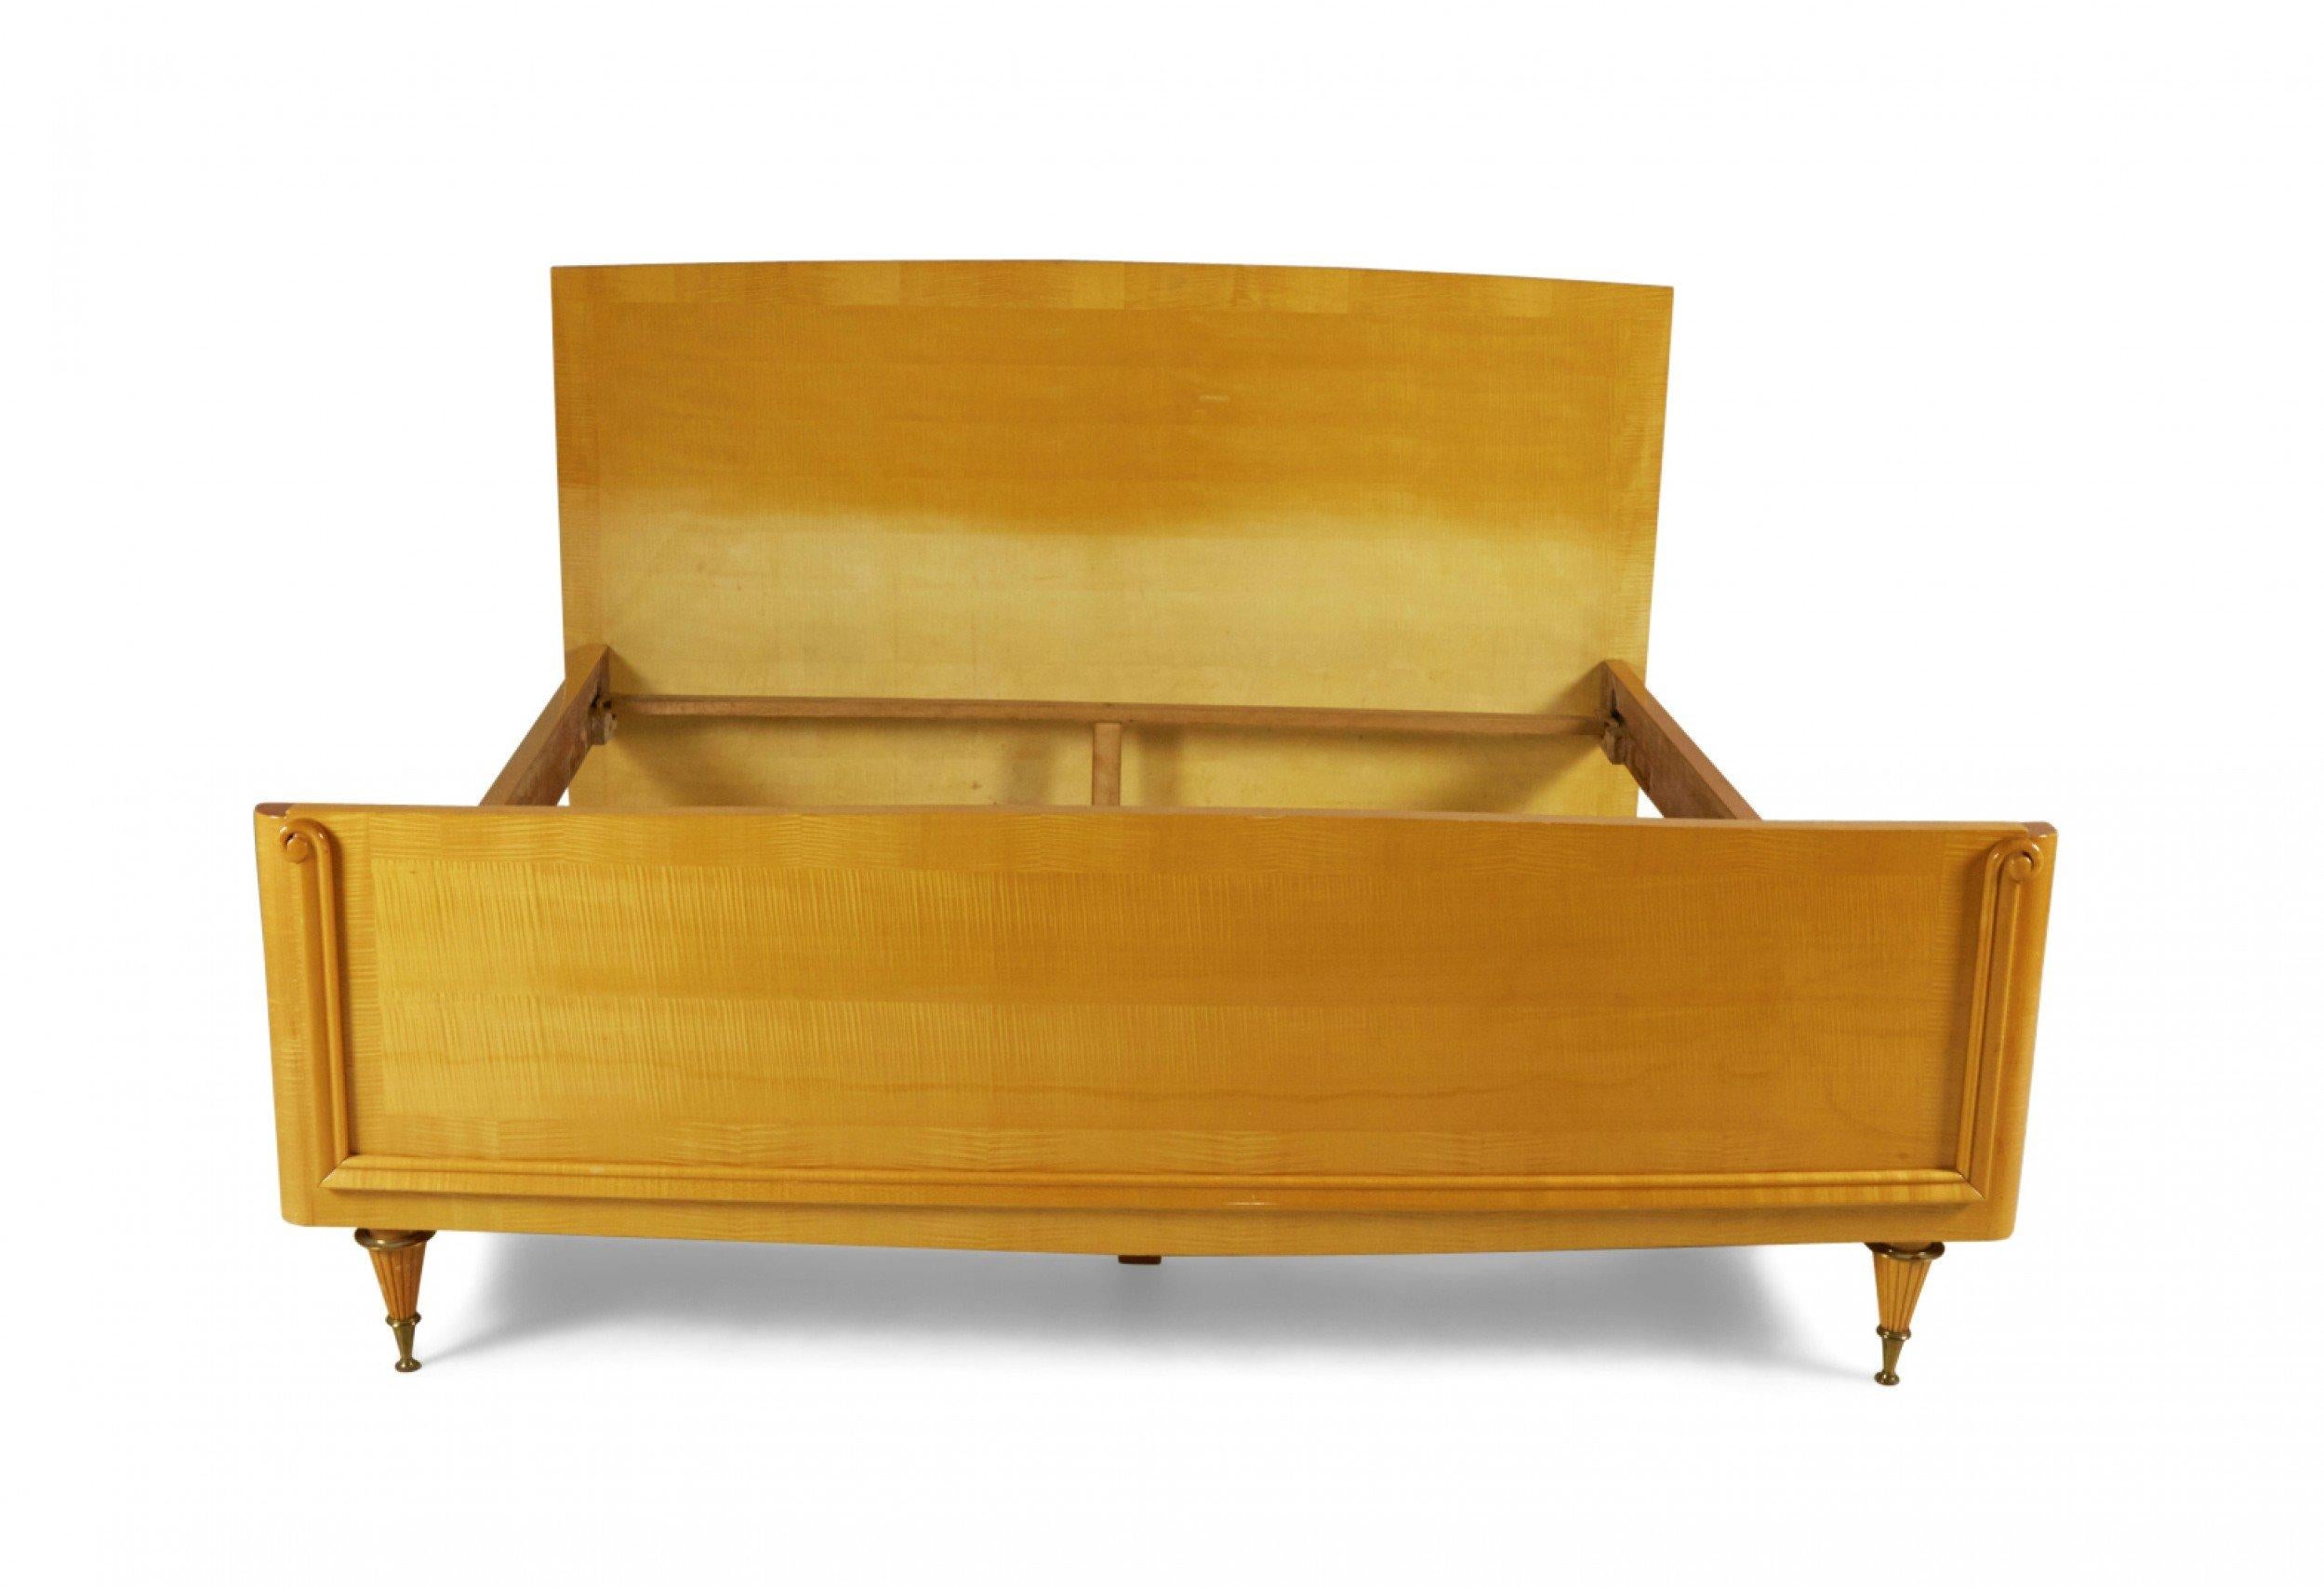 French Art Deco maple queen-size bed with tapered, fluted legs ending in bronze sabots and scroll detail trim on footboard (includes headboard, footboard, and rails).